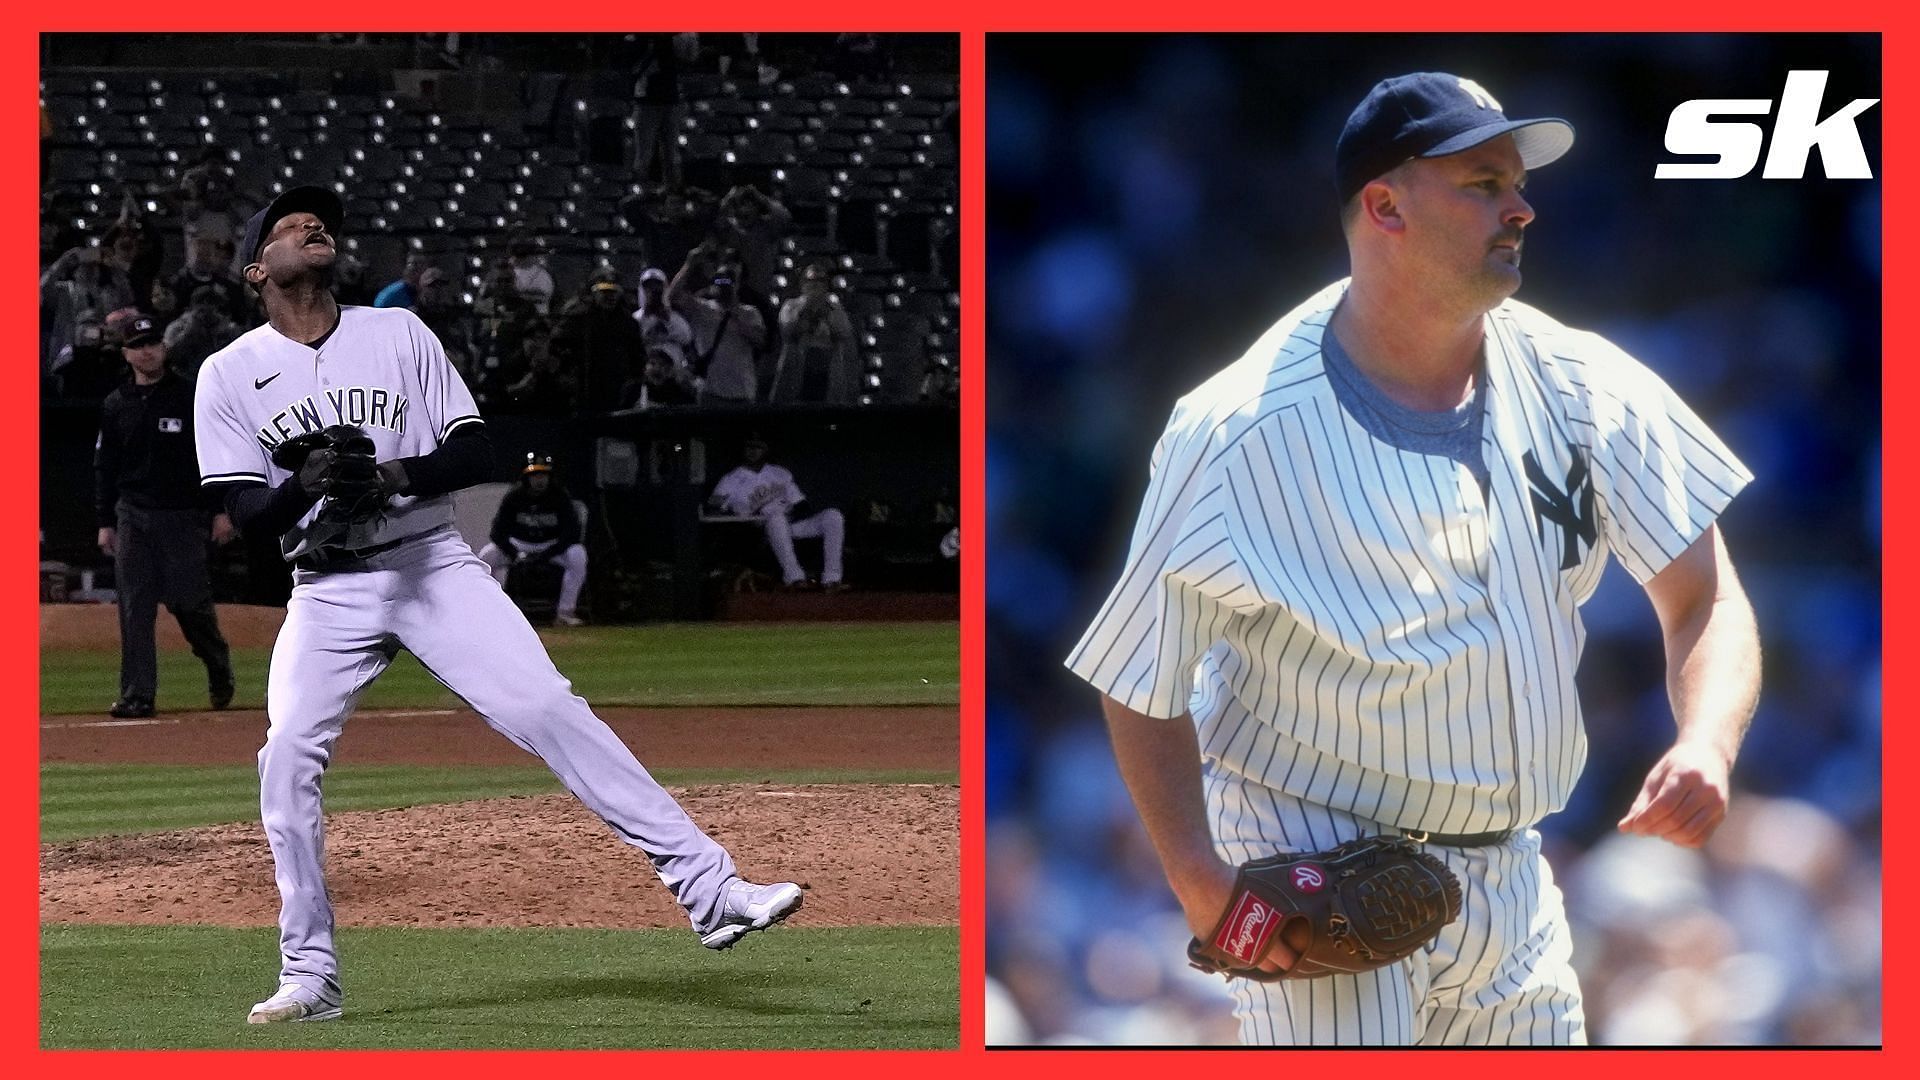 Domingo German has become the fourth Yankees pitcher to throw a perfect game. But who are the others?